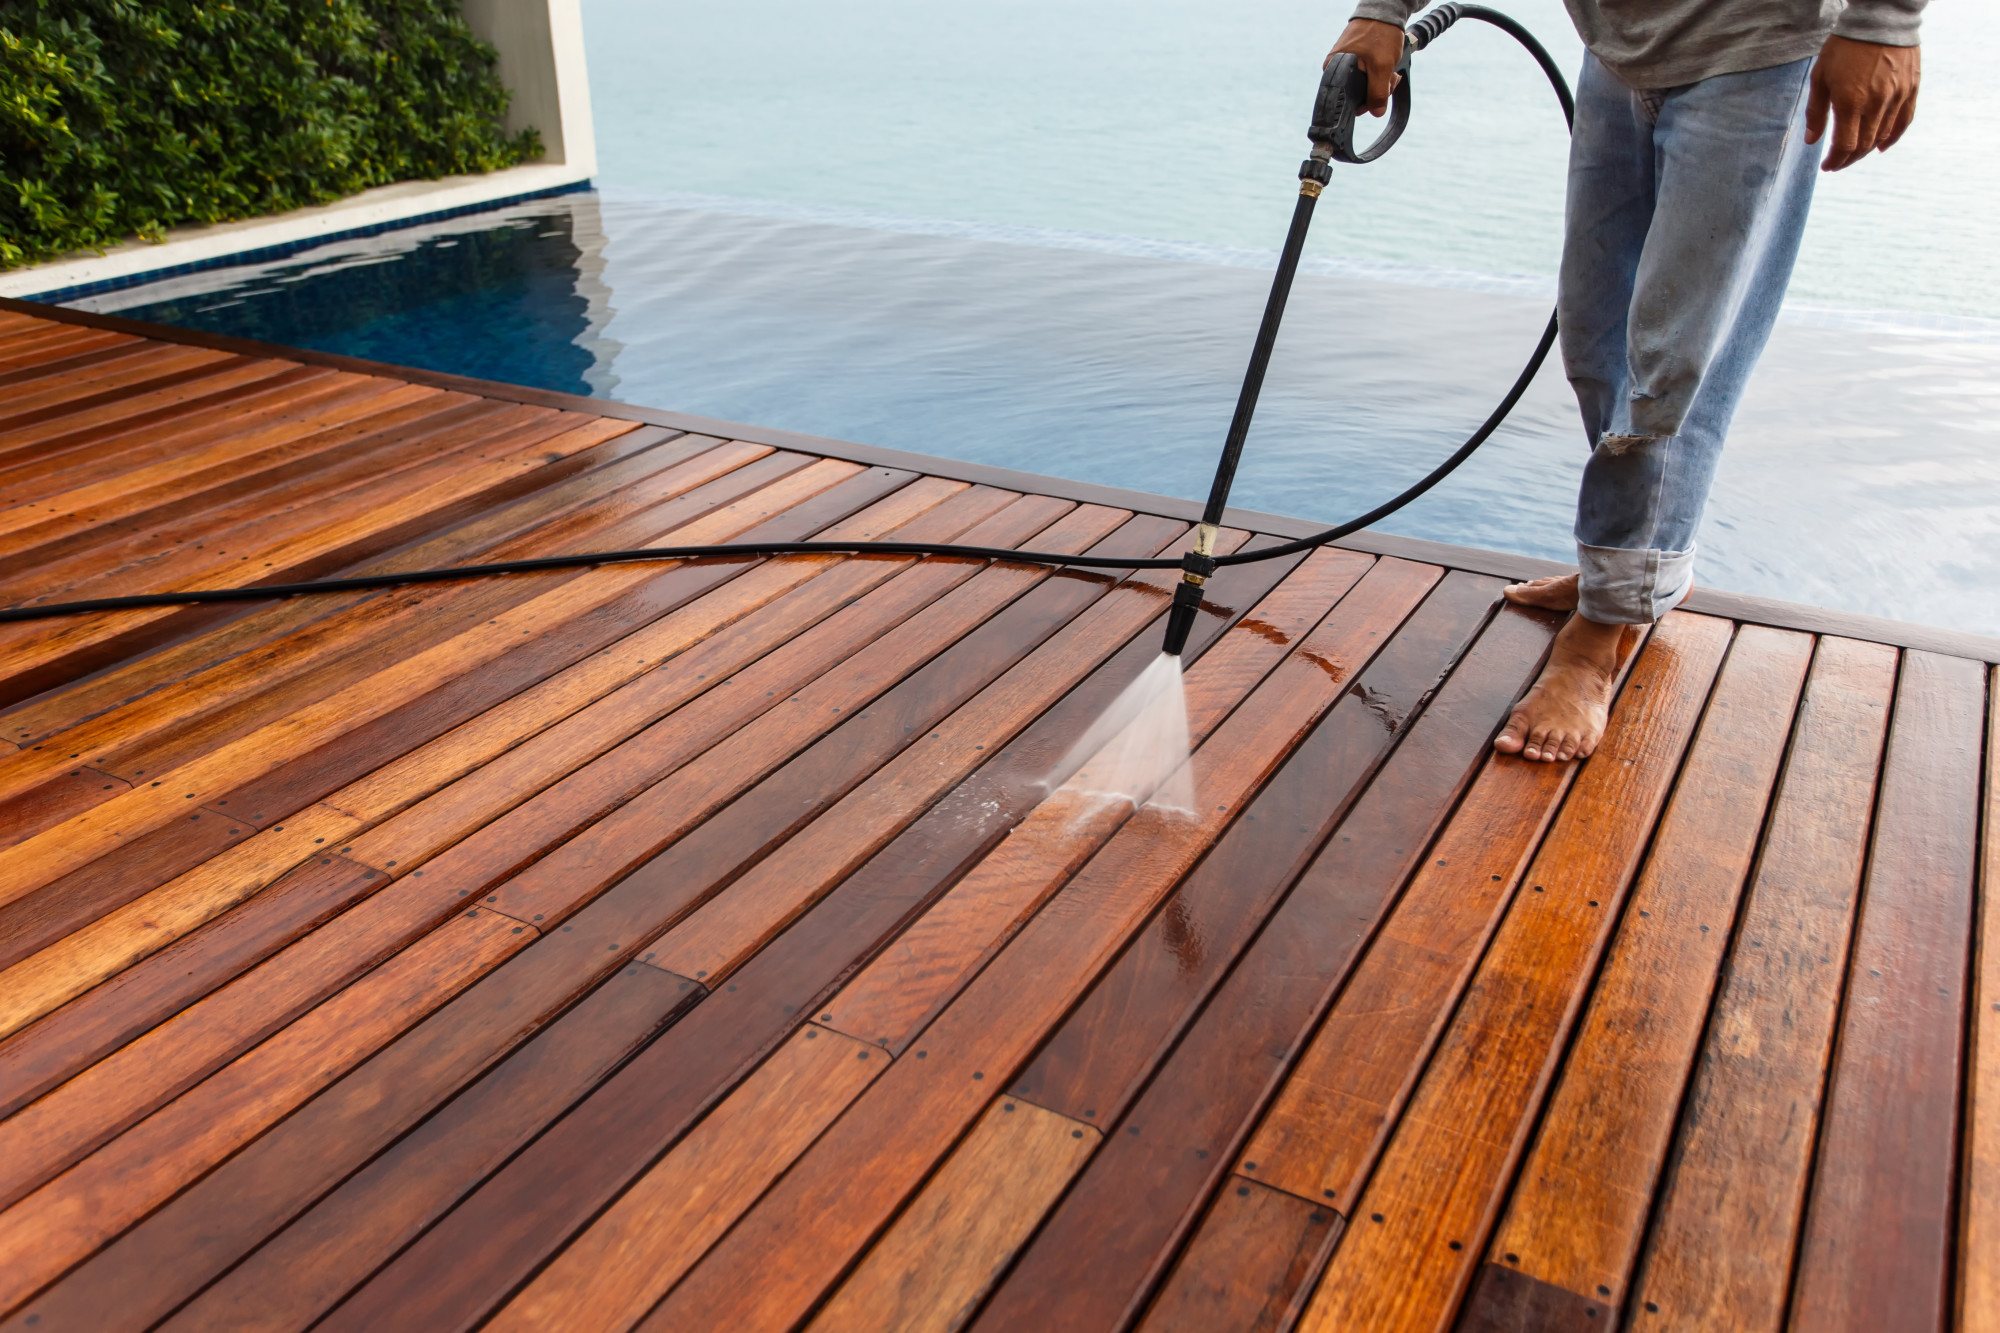 This Is How to Clean a Pool Deck the Right Way